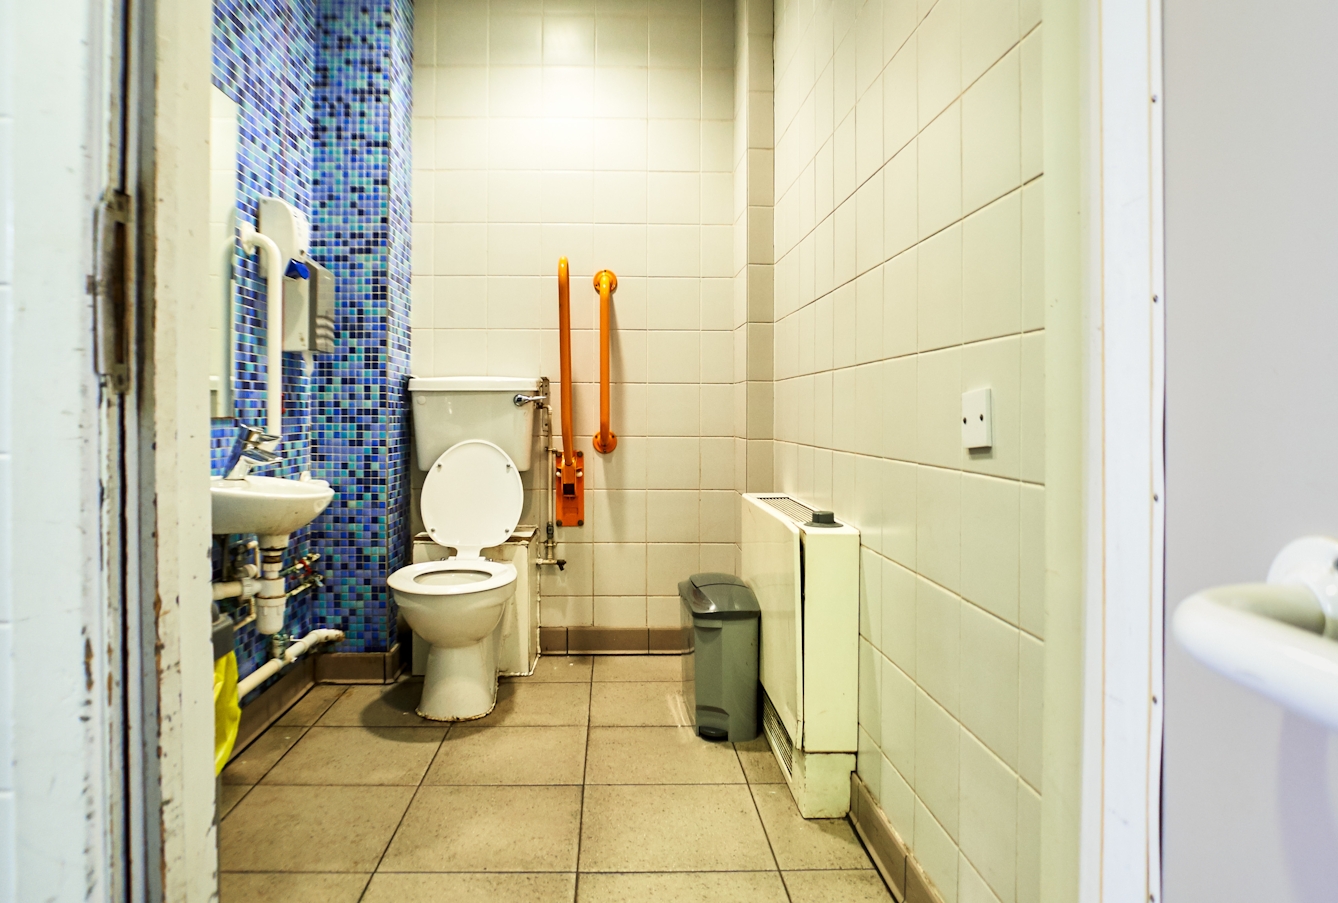 Photograph though the doorway of an accessible toilet showing part of the door and doorframe, along with the contents of the room, toilet, basin, sanitary bin and baby changing table. One of the walls is covered in a tile mosaic made up of small blue, green and black tiles.